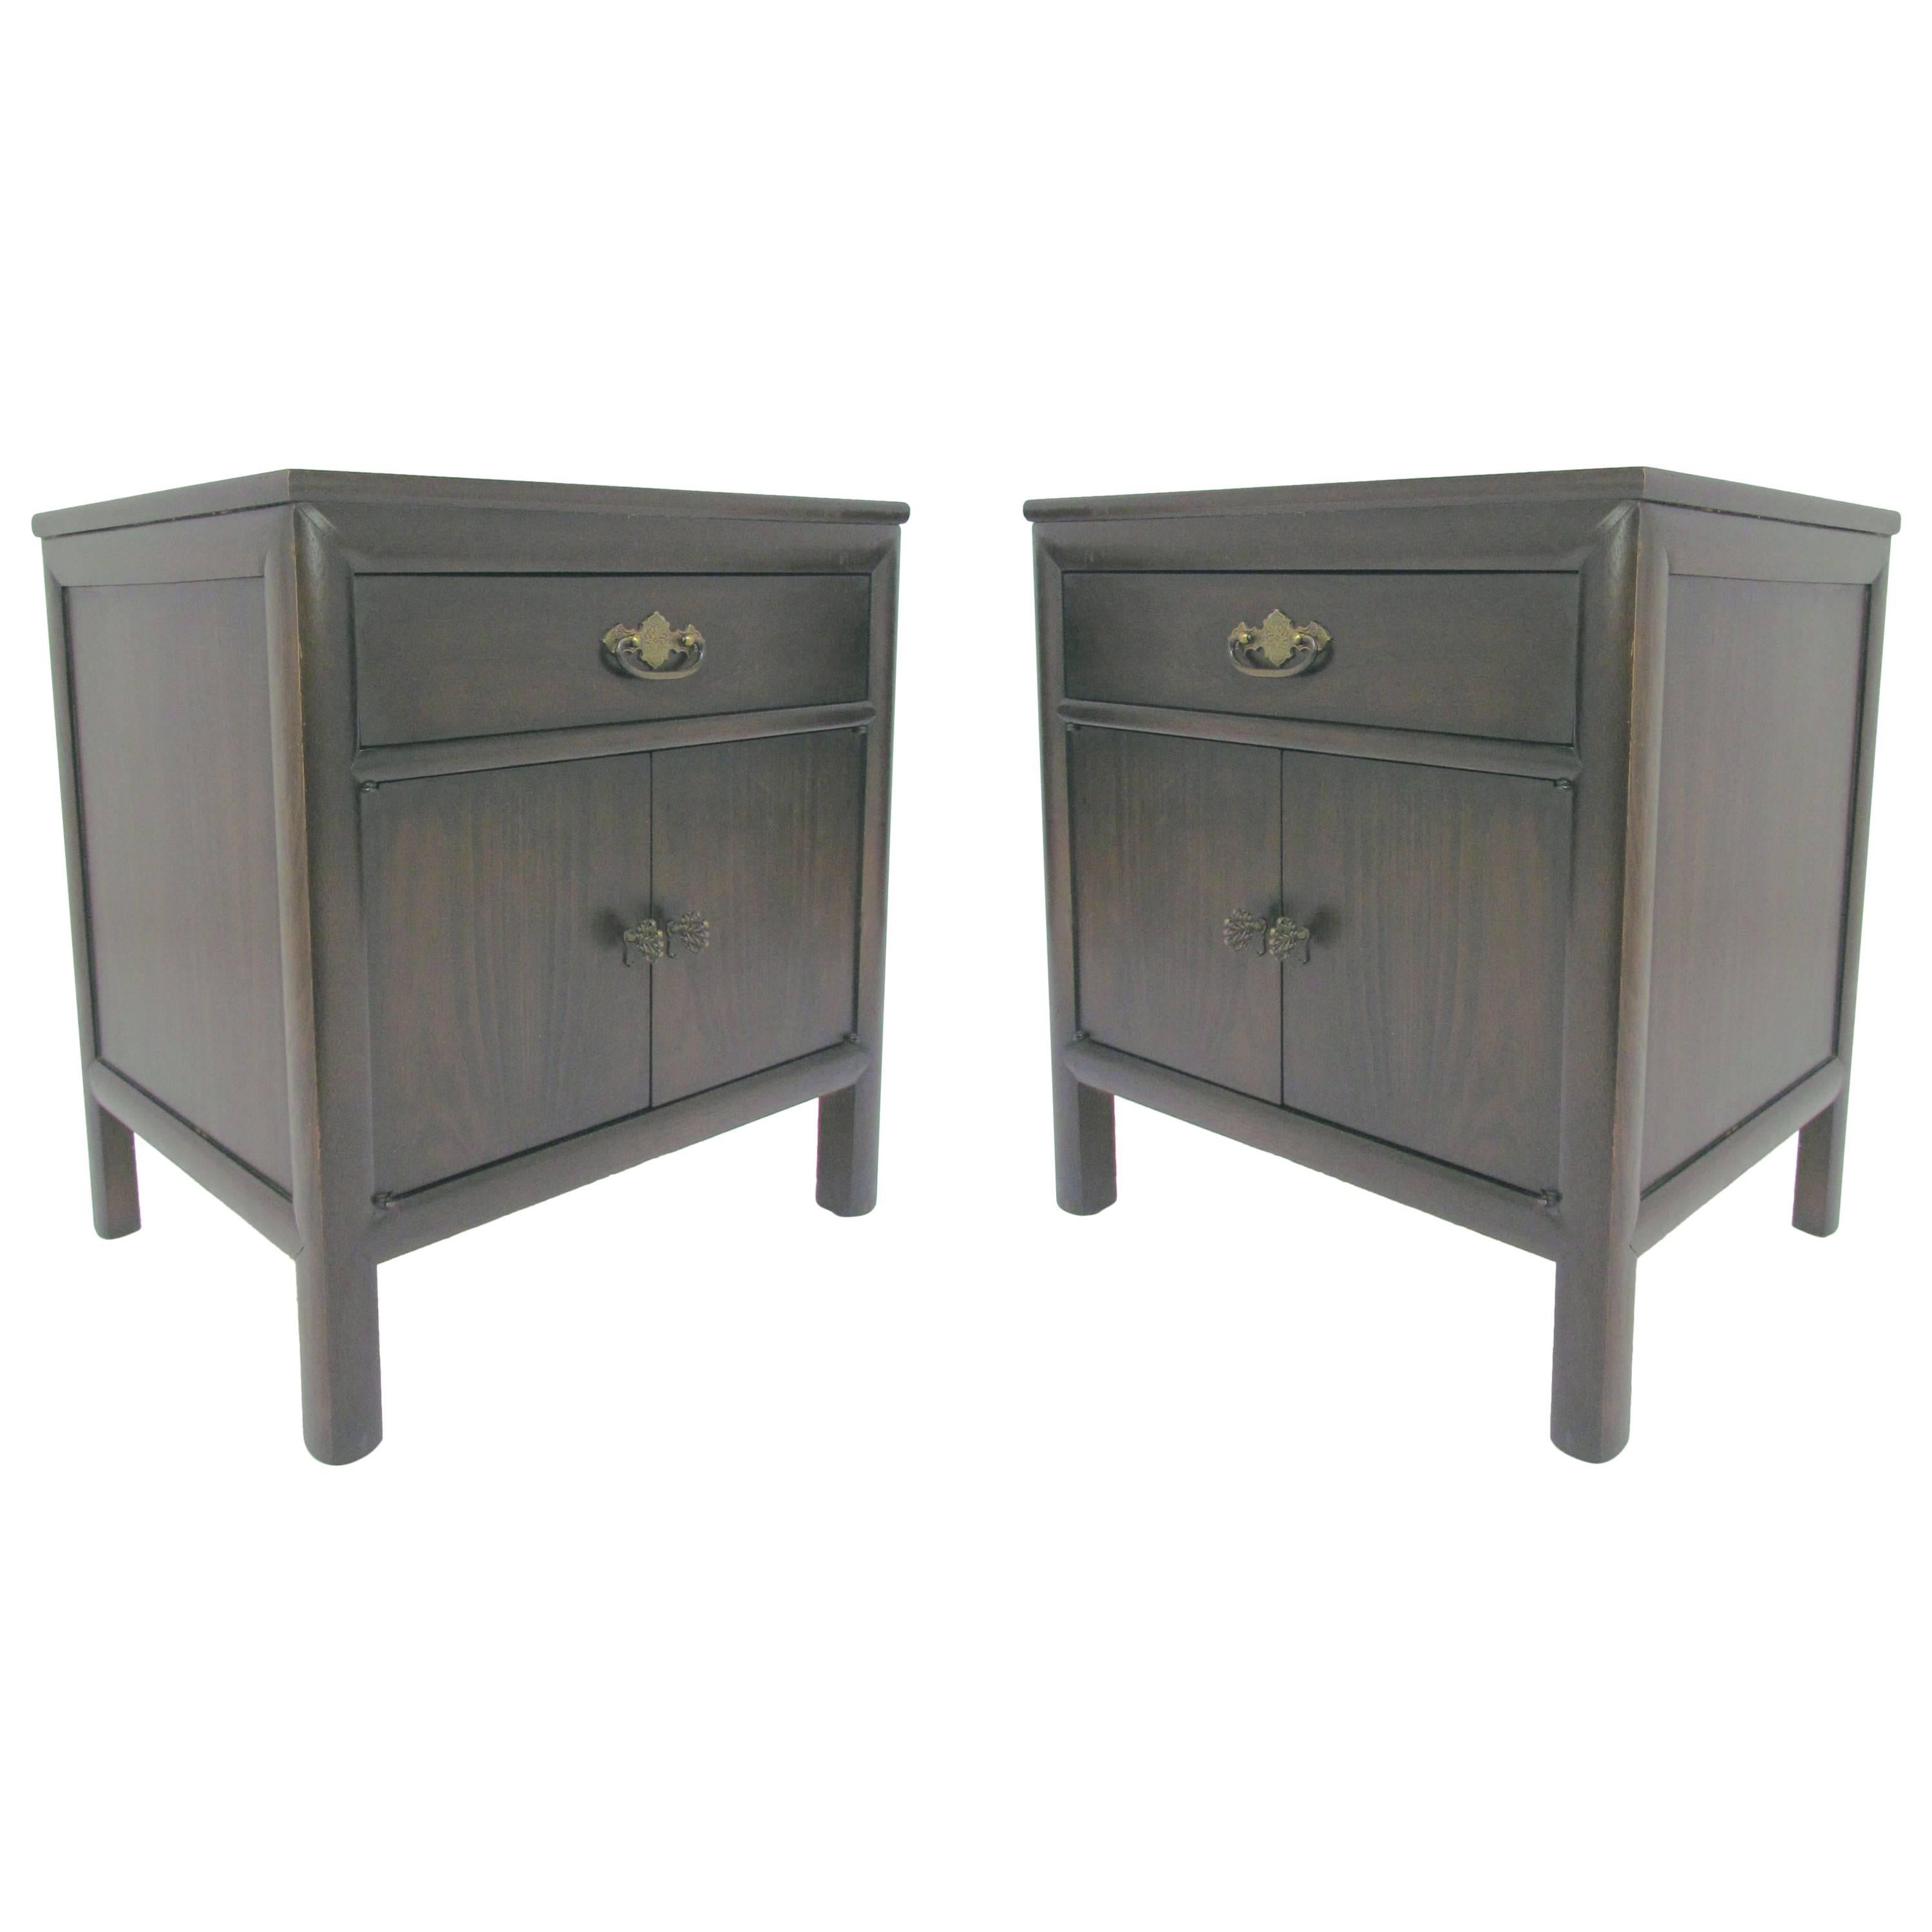 Pair of Mid-Century Asian Inspired Nightstands by Ray Sabota for Century 